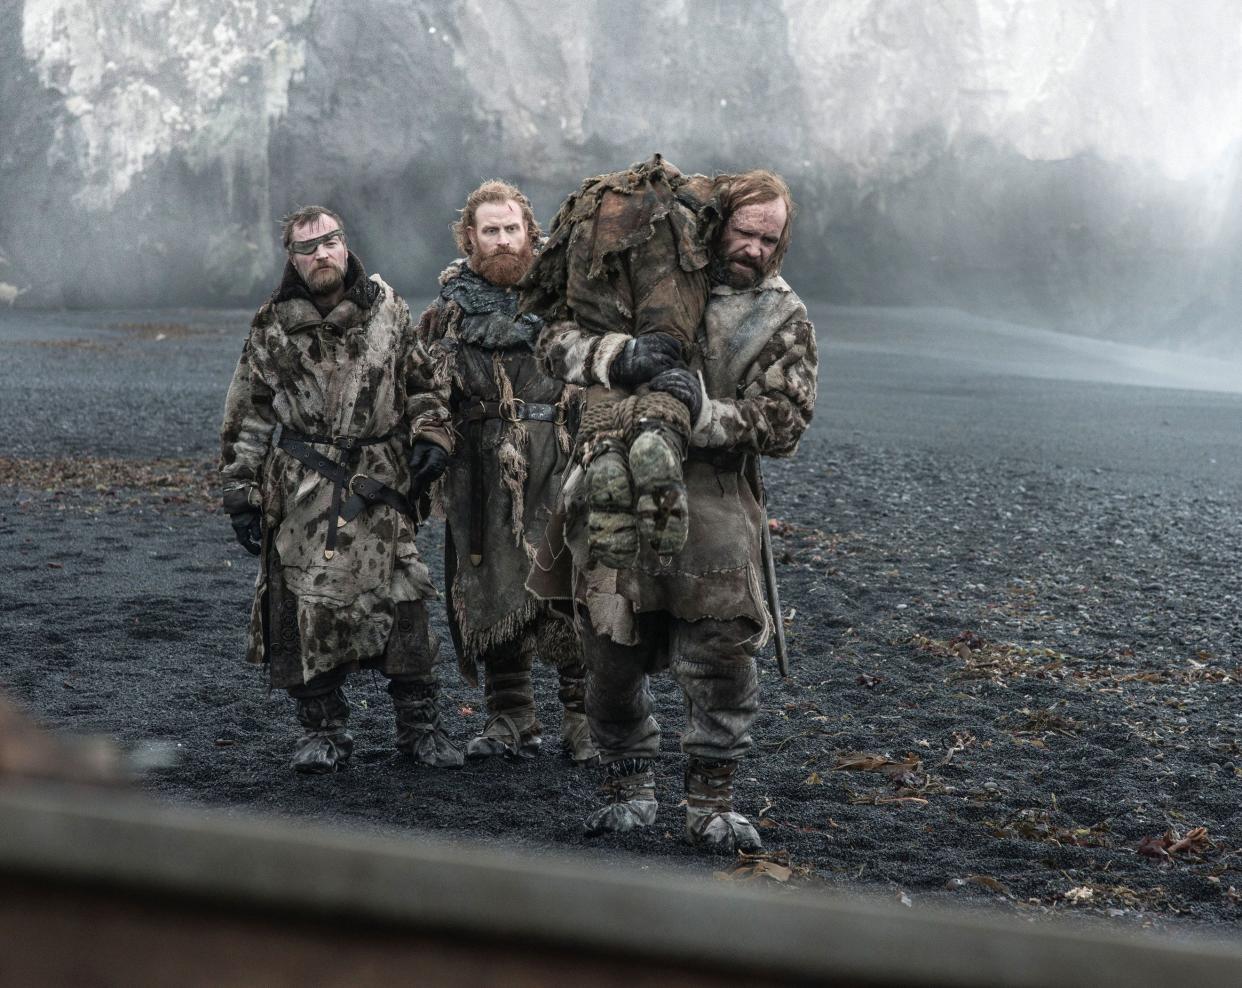 Tormund and The Hound of ‘Game of Thrones’. (PHOTO: HBO)